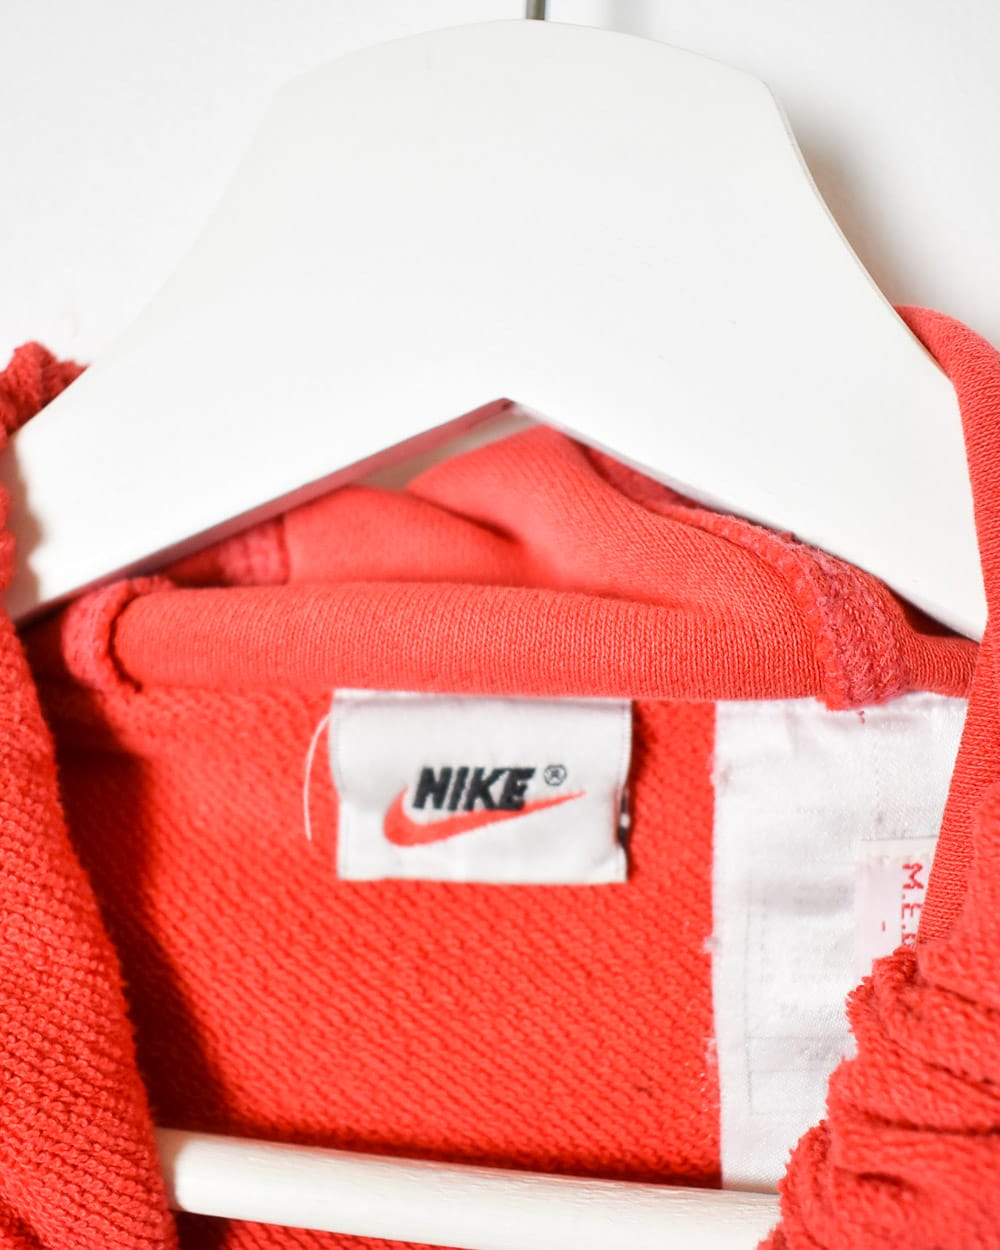 Red Nike Button Down Hoodie - Large